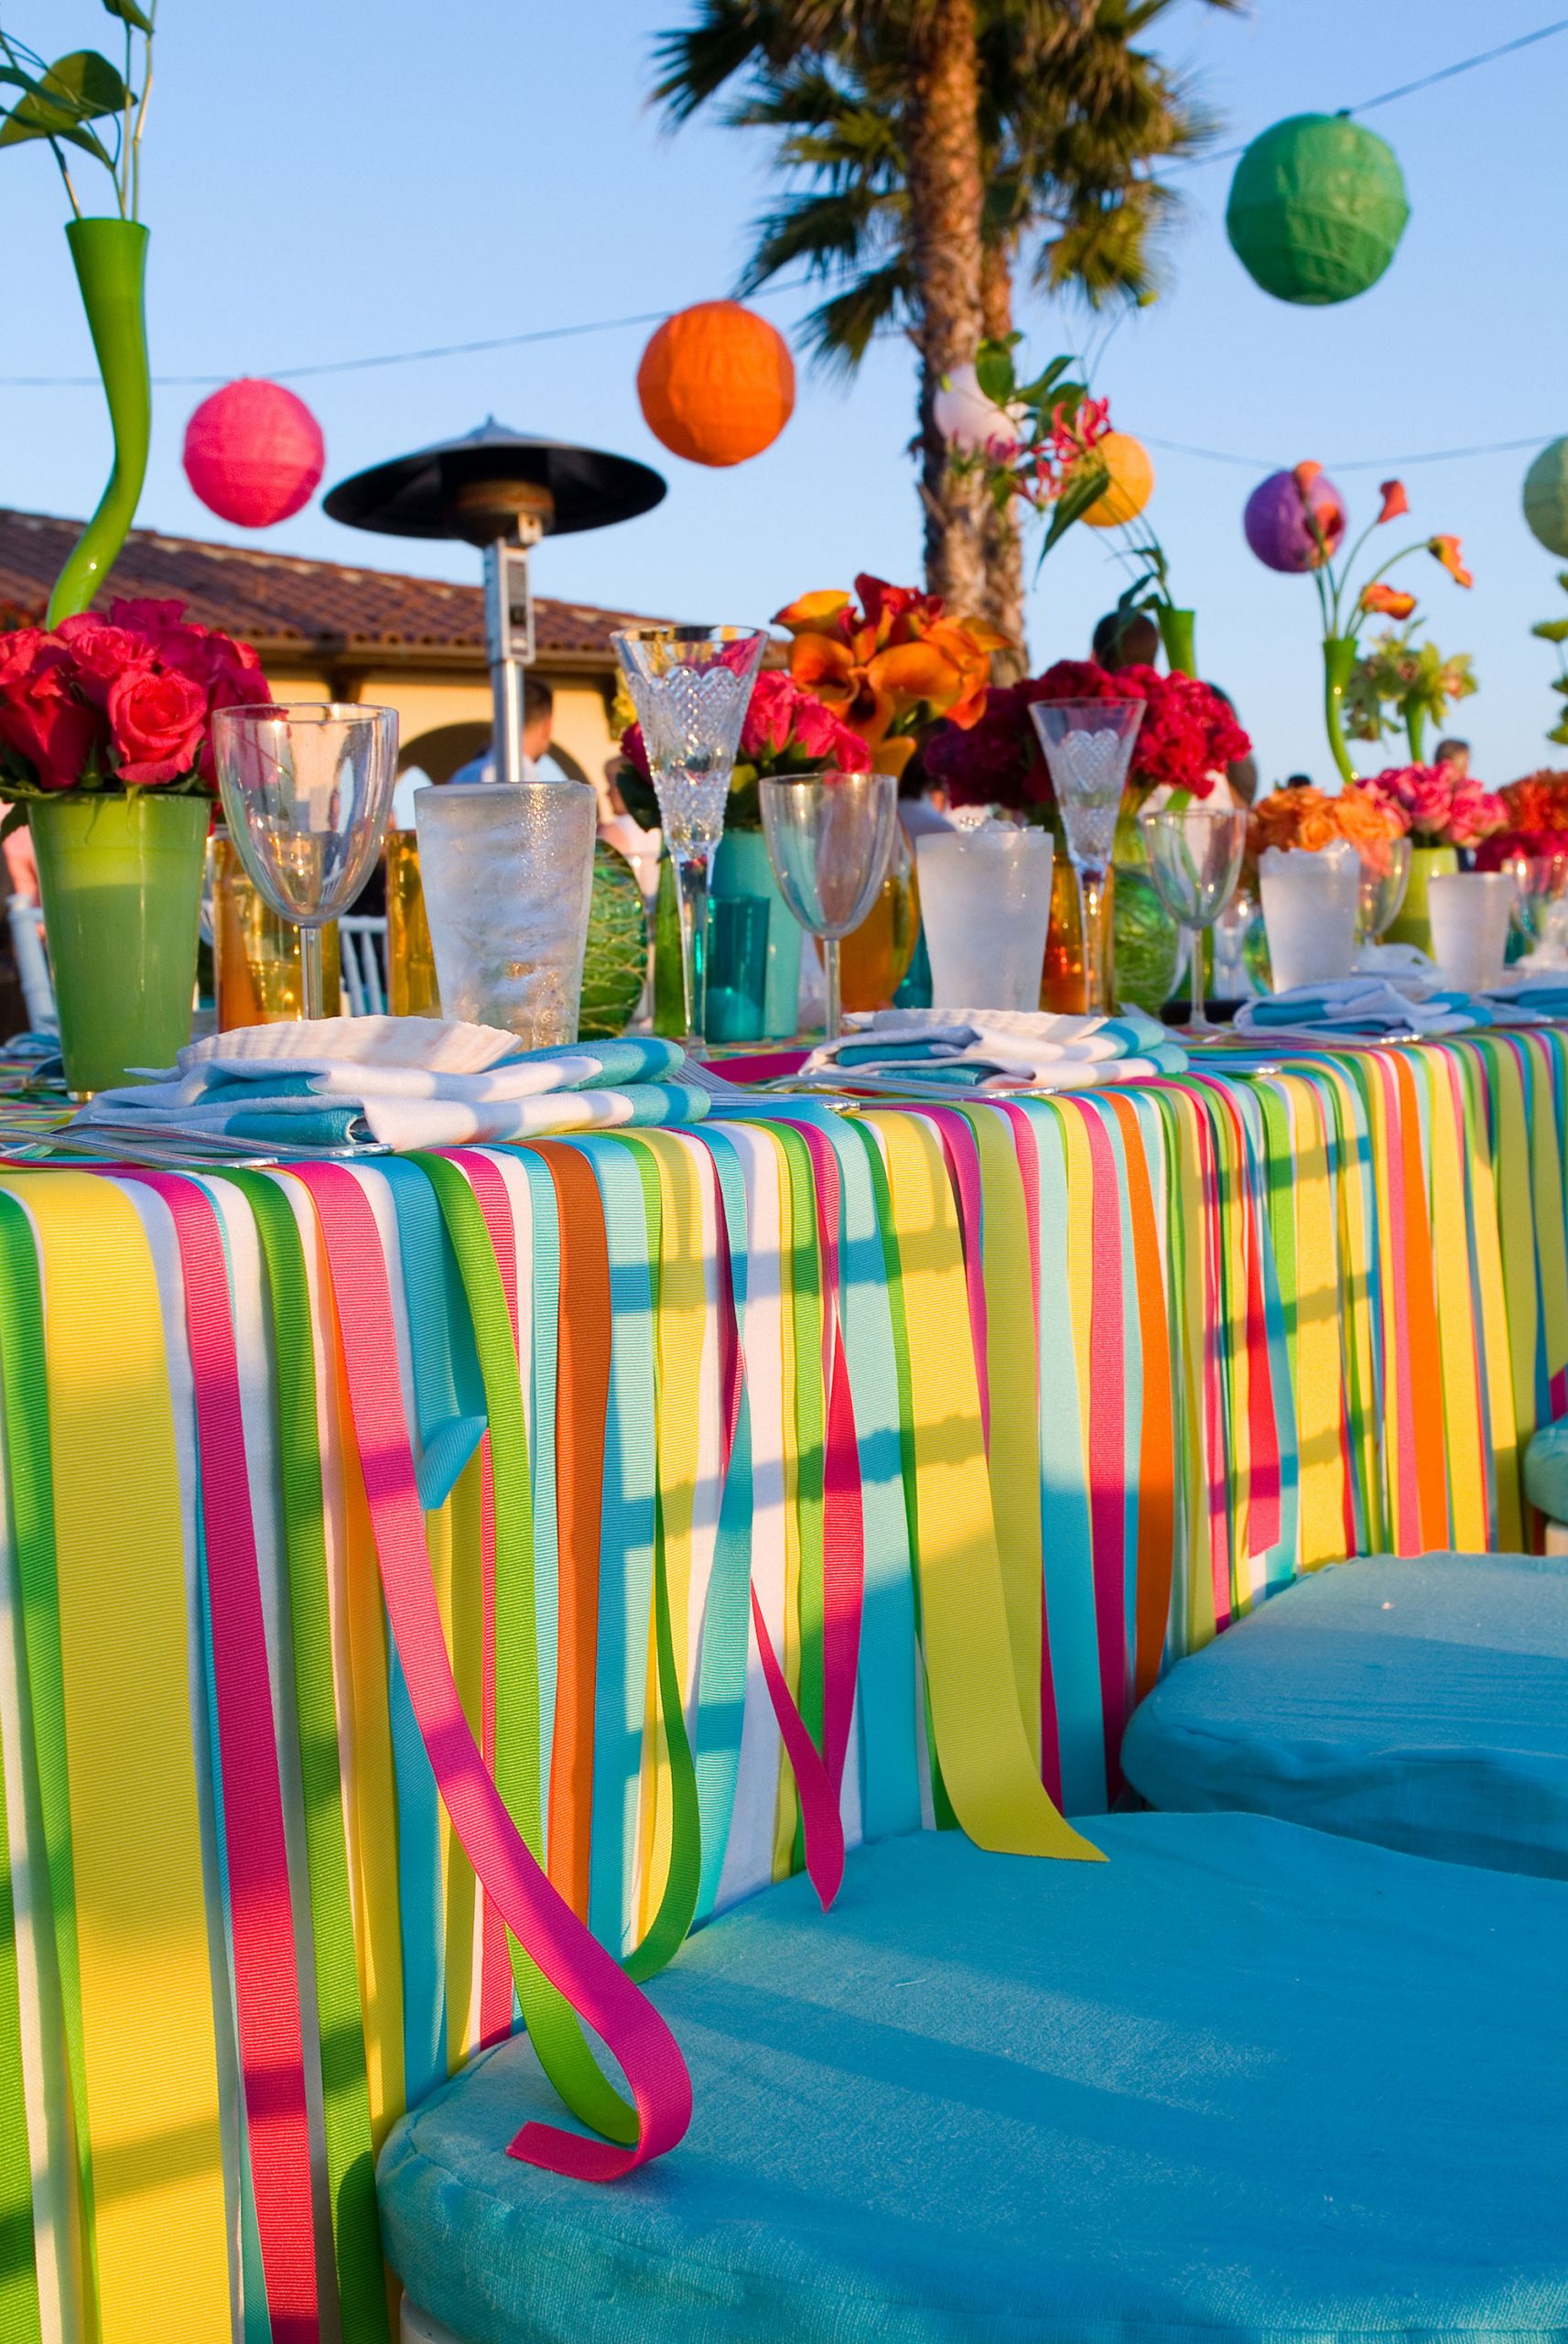 Decoration Ideas For Backyard Party
 Backyard Party Ideas How To Throw An Outdoor Party